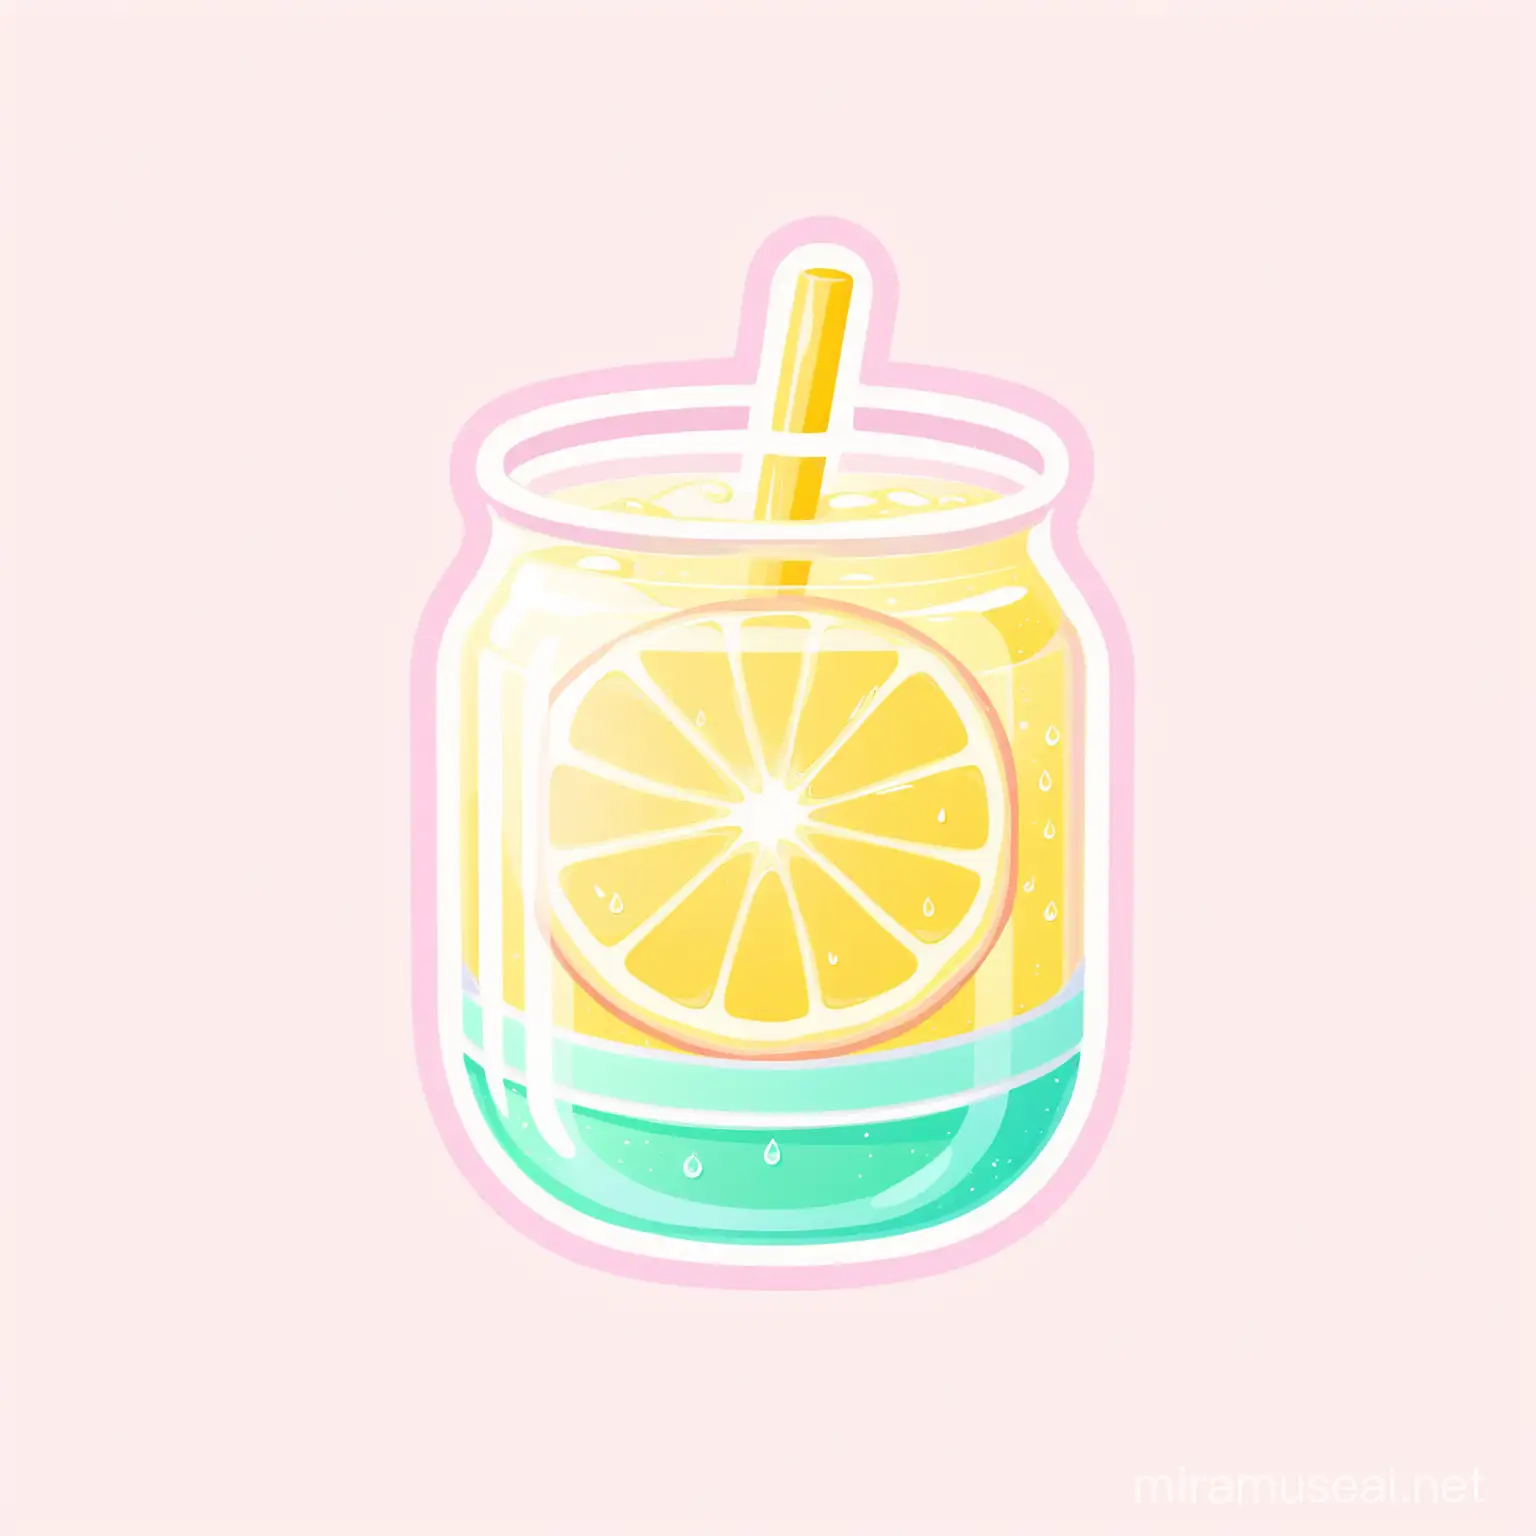 give me a line-art logo on a white background for a wellness app, using pastel lemonade colors only.   LMND underneath